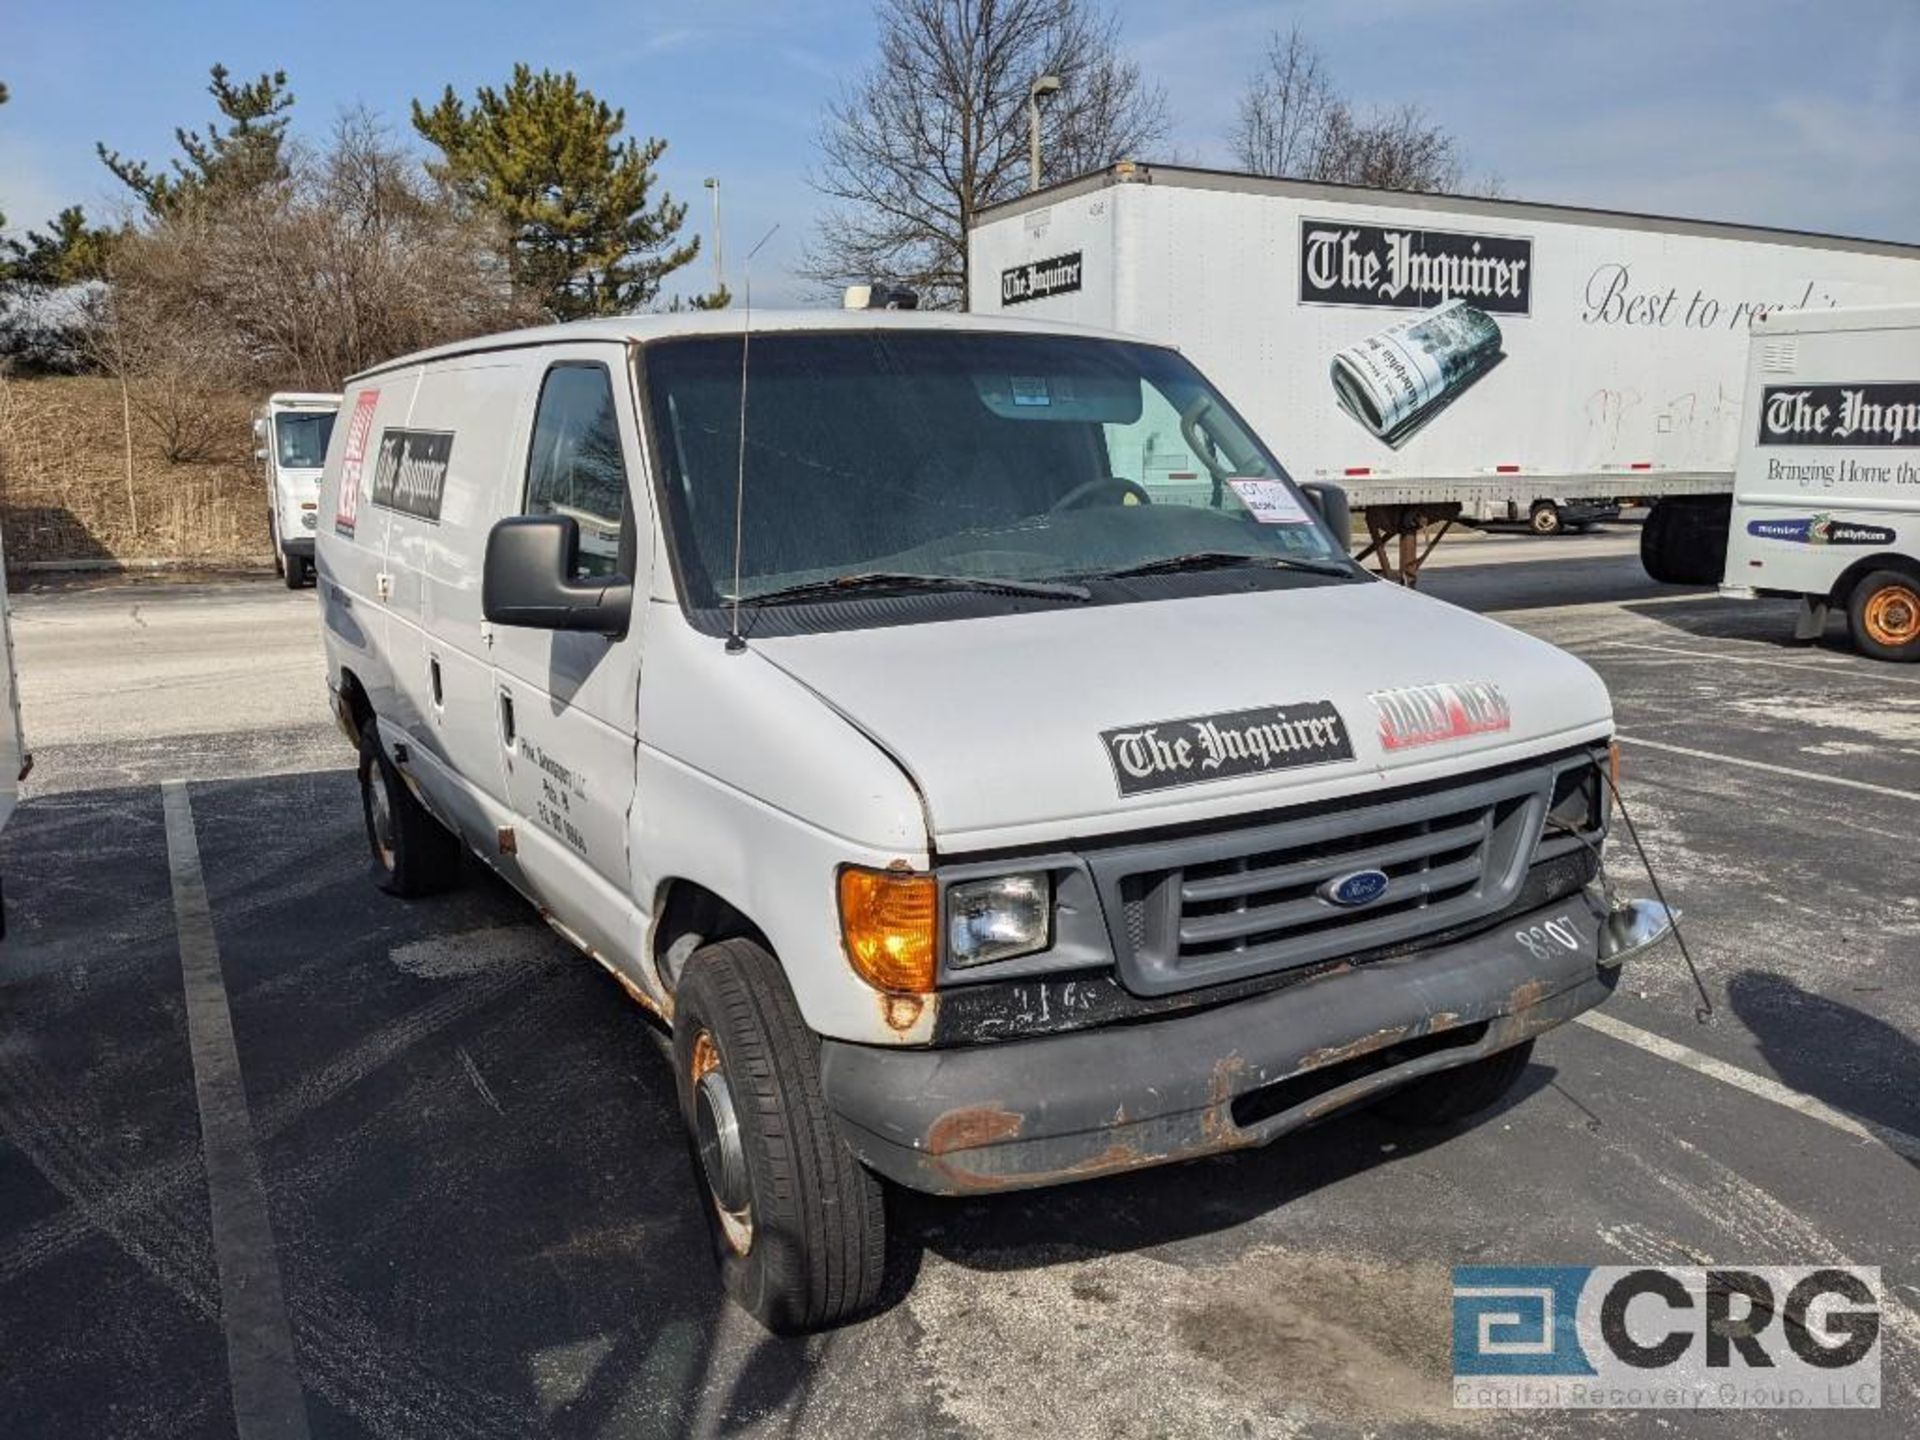 2003 Ford E250 Step Van - 8600 GVW, For Parts only VIN# N/A, Unit # 8307 - Image 2 of 3